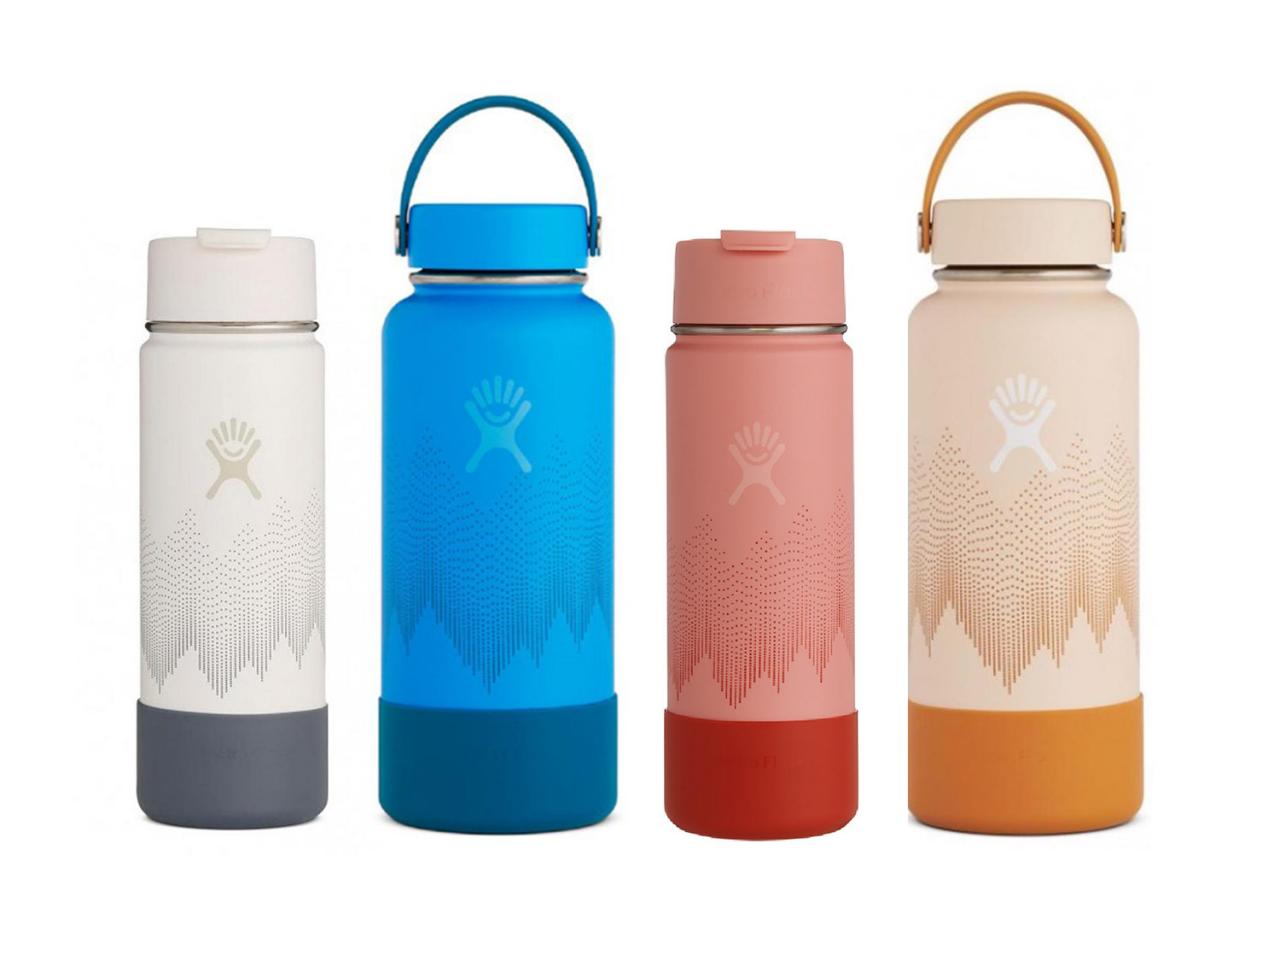 https://food.fnr.sndimg.com/content/dam/images/food/products/2019/12/2/rx_hydroflask-wander-series.jpg.rend.hgtvcom.1280.960.suffix/1575313173880.jpeg